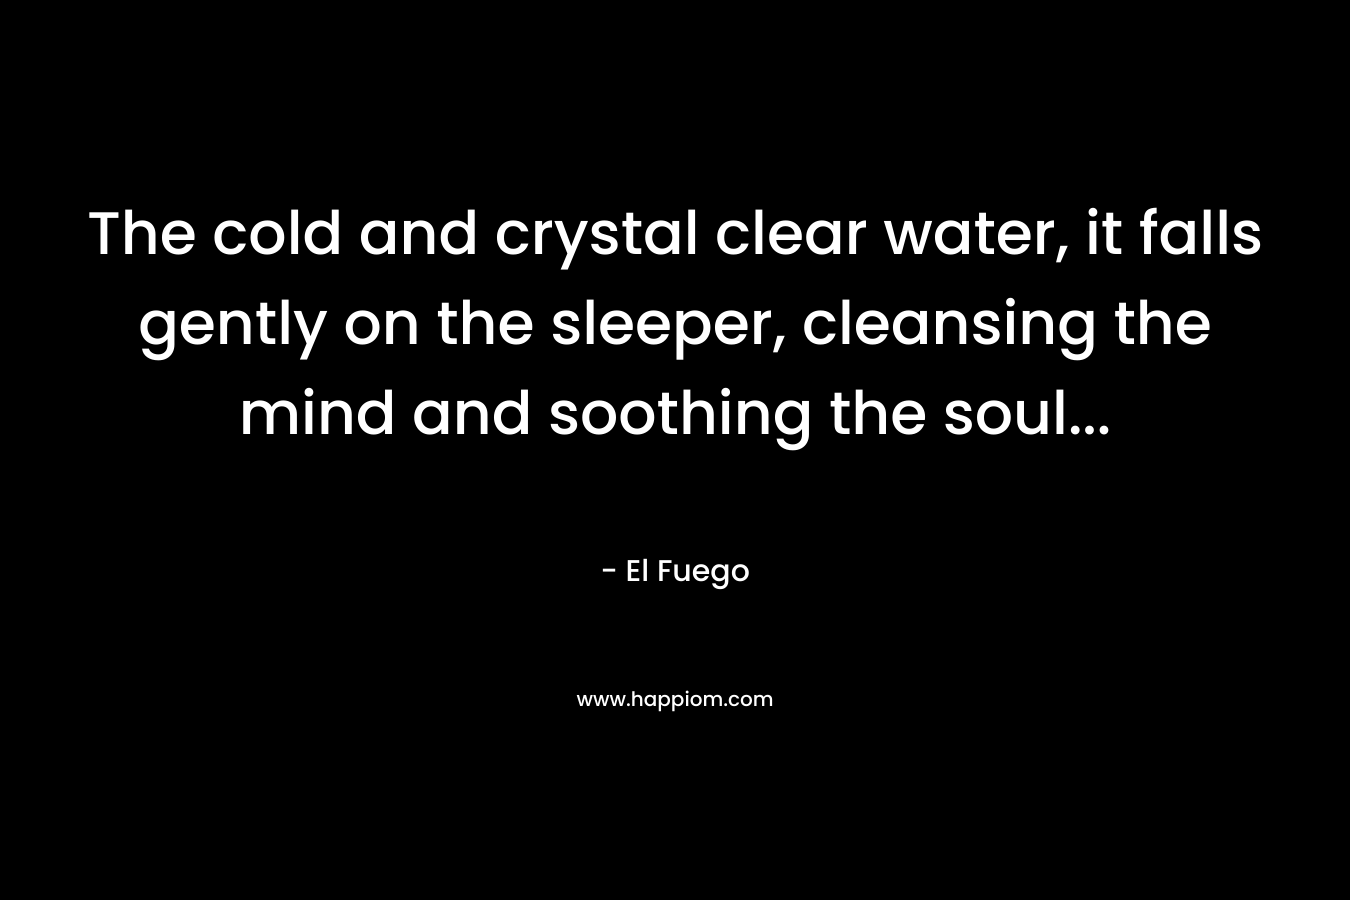 The cold and crystal clear water, it falls gently on the sleeper, cleansing the mind and soothing the soul… – El Fuego